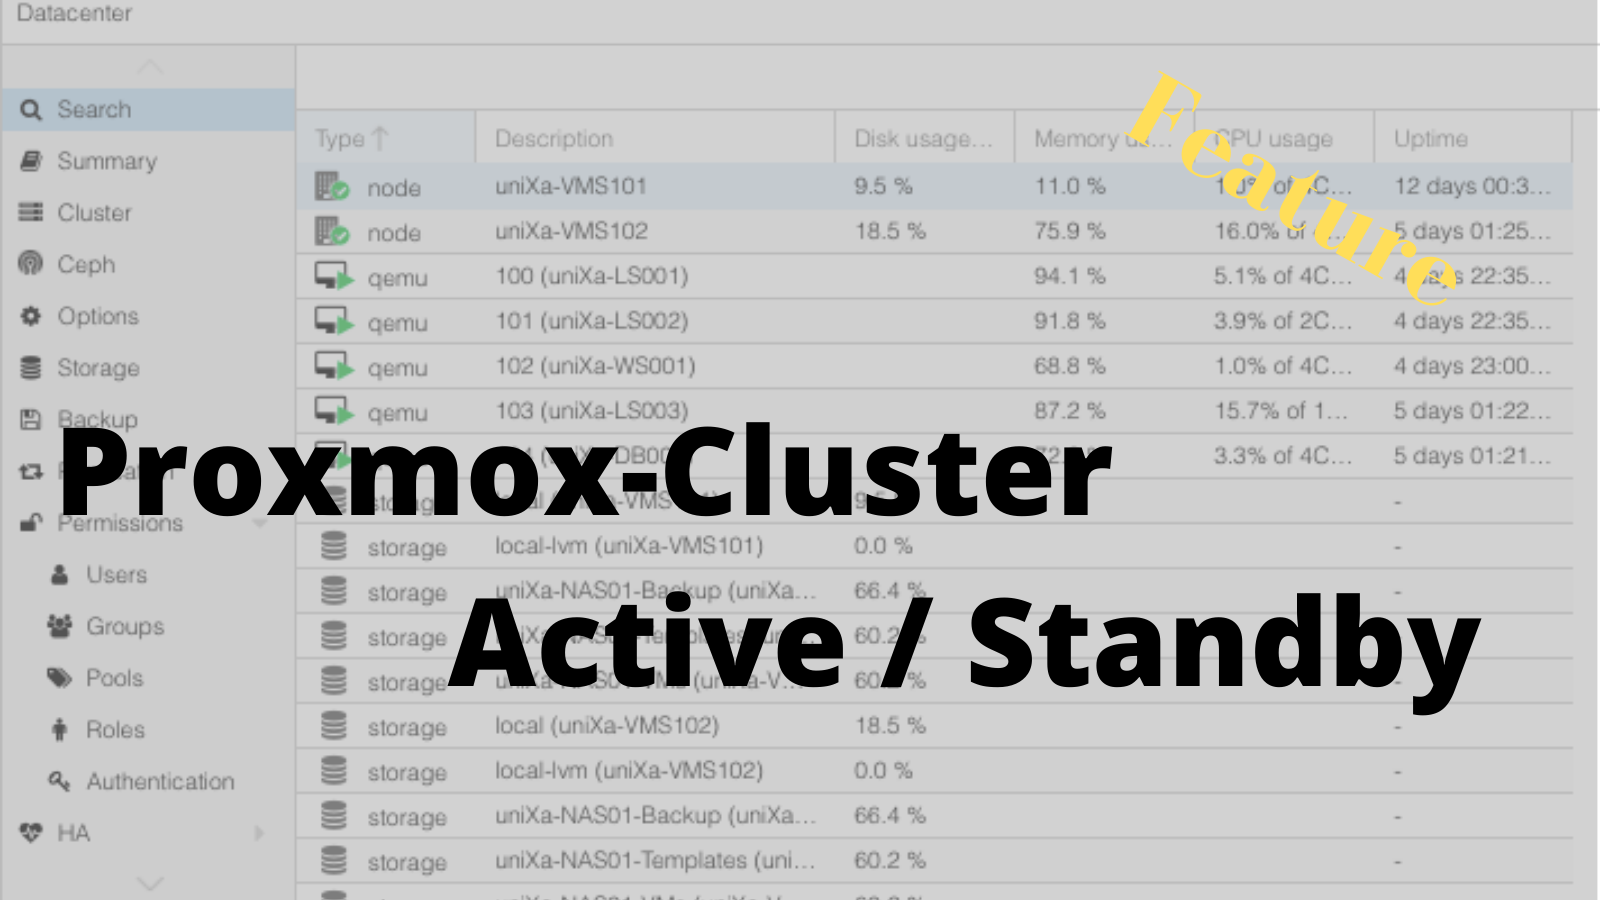 Proxmox Cluster – Active / Standby